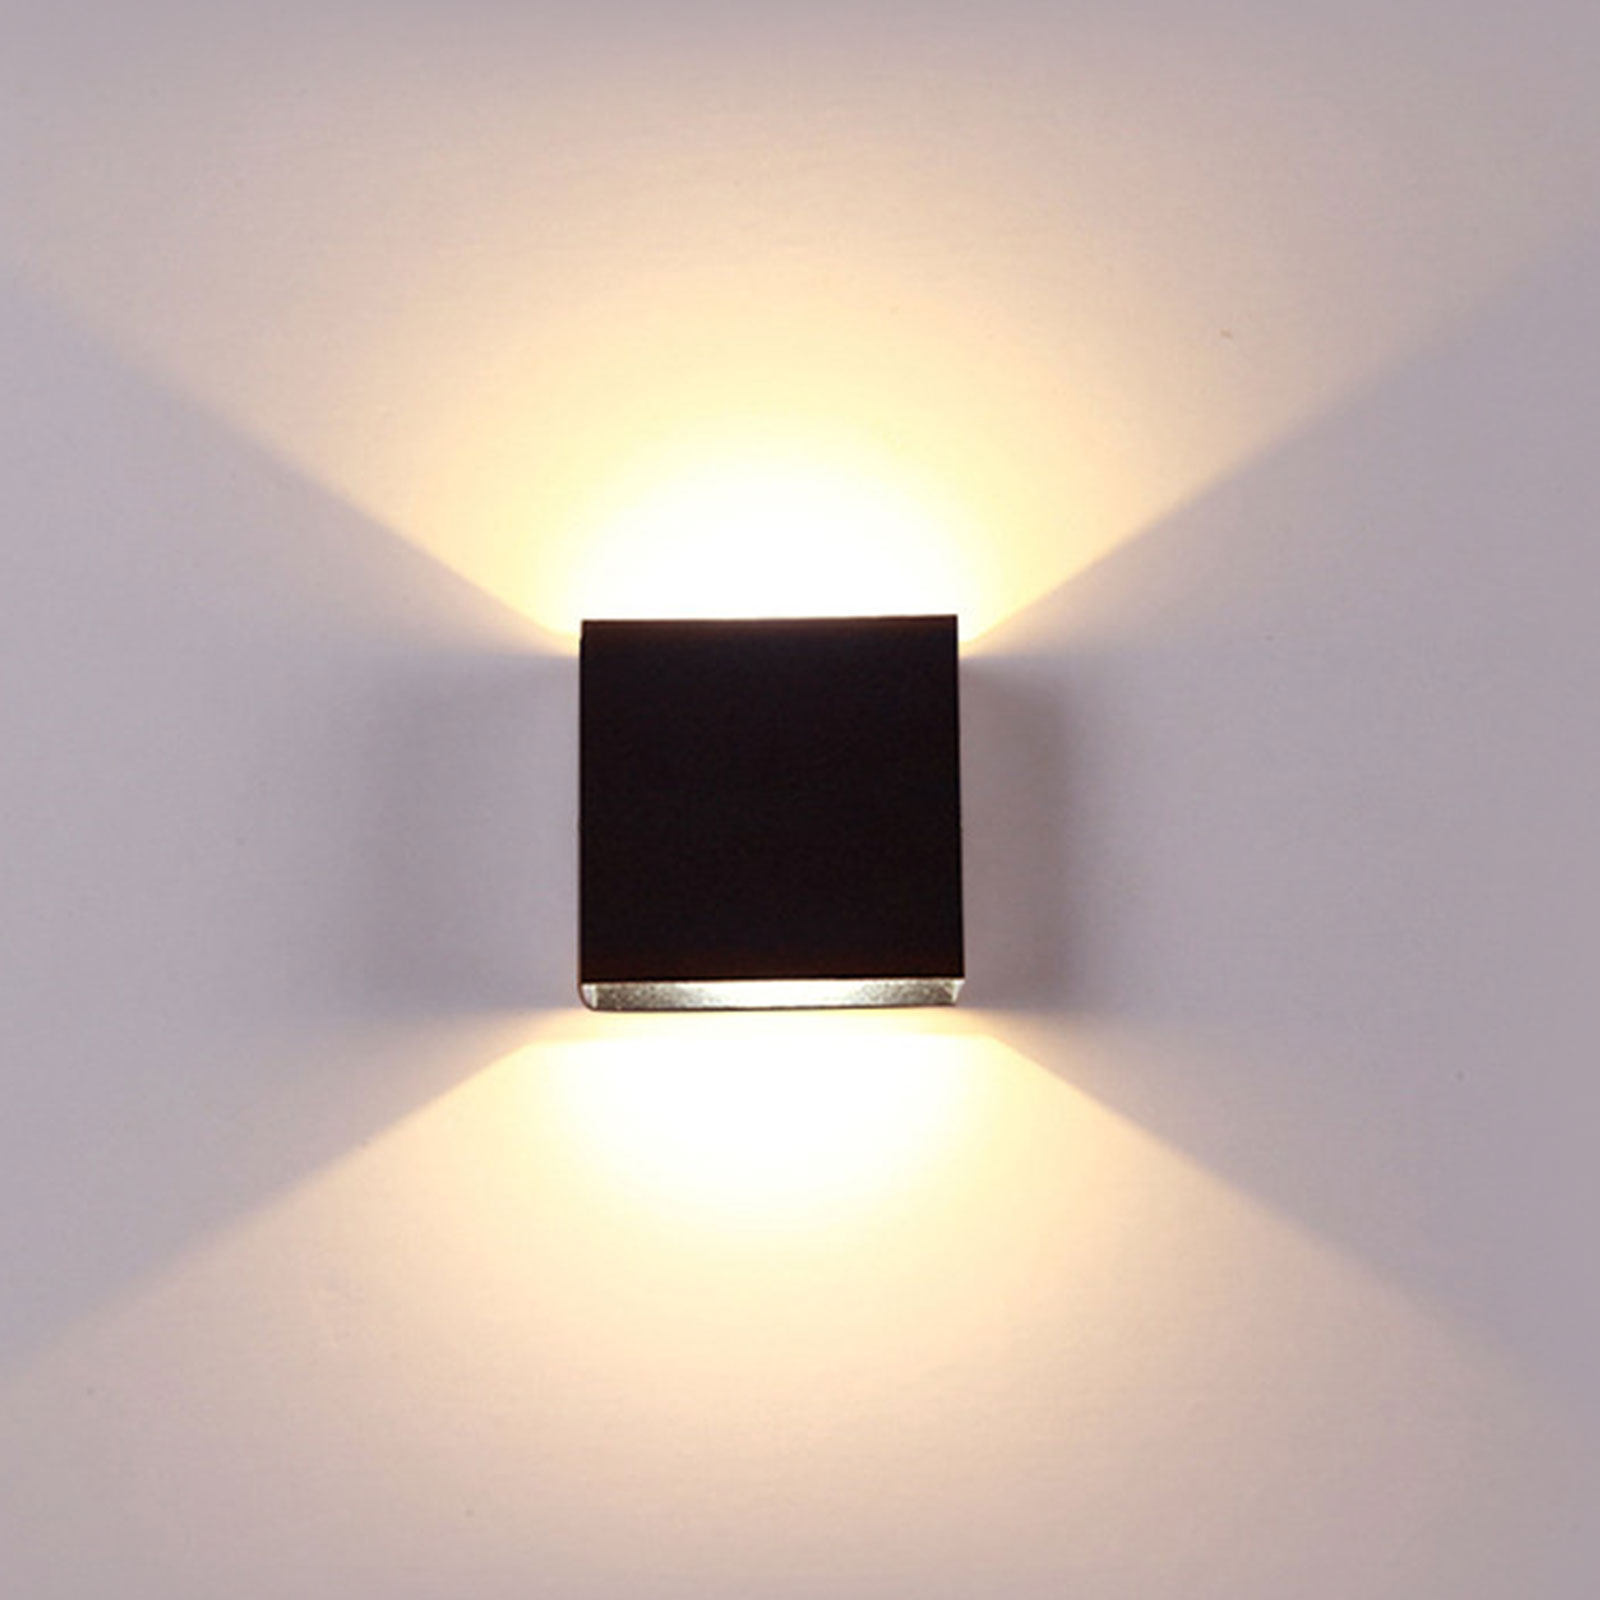 Modern COB LED Wall Light Up Down Cube Indoor Outdoor Sconce Lighting Lamp New 